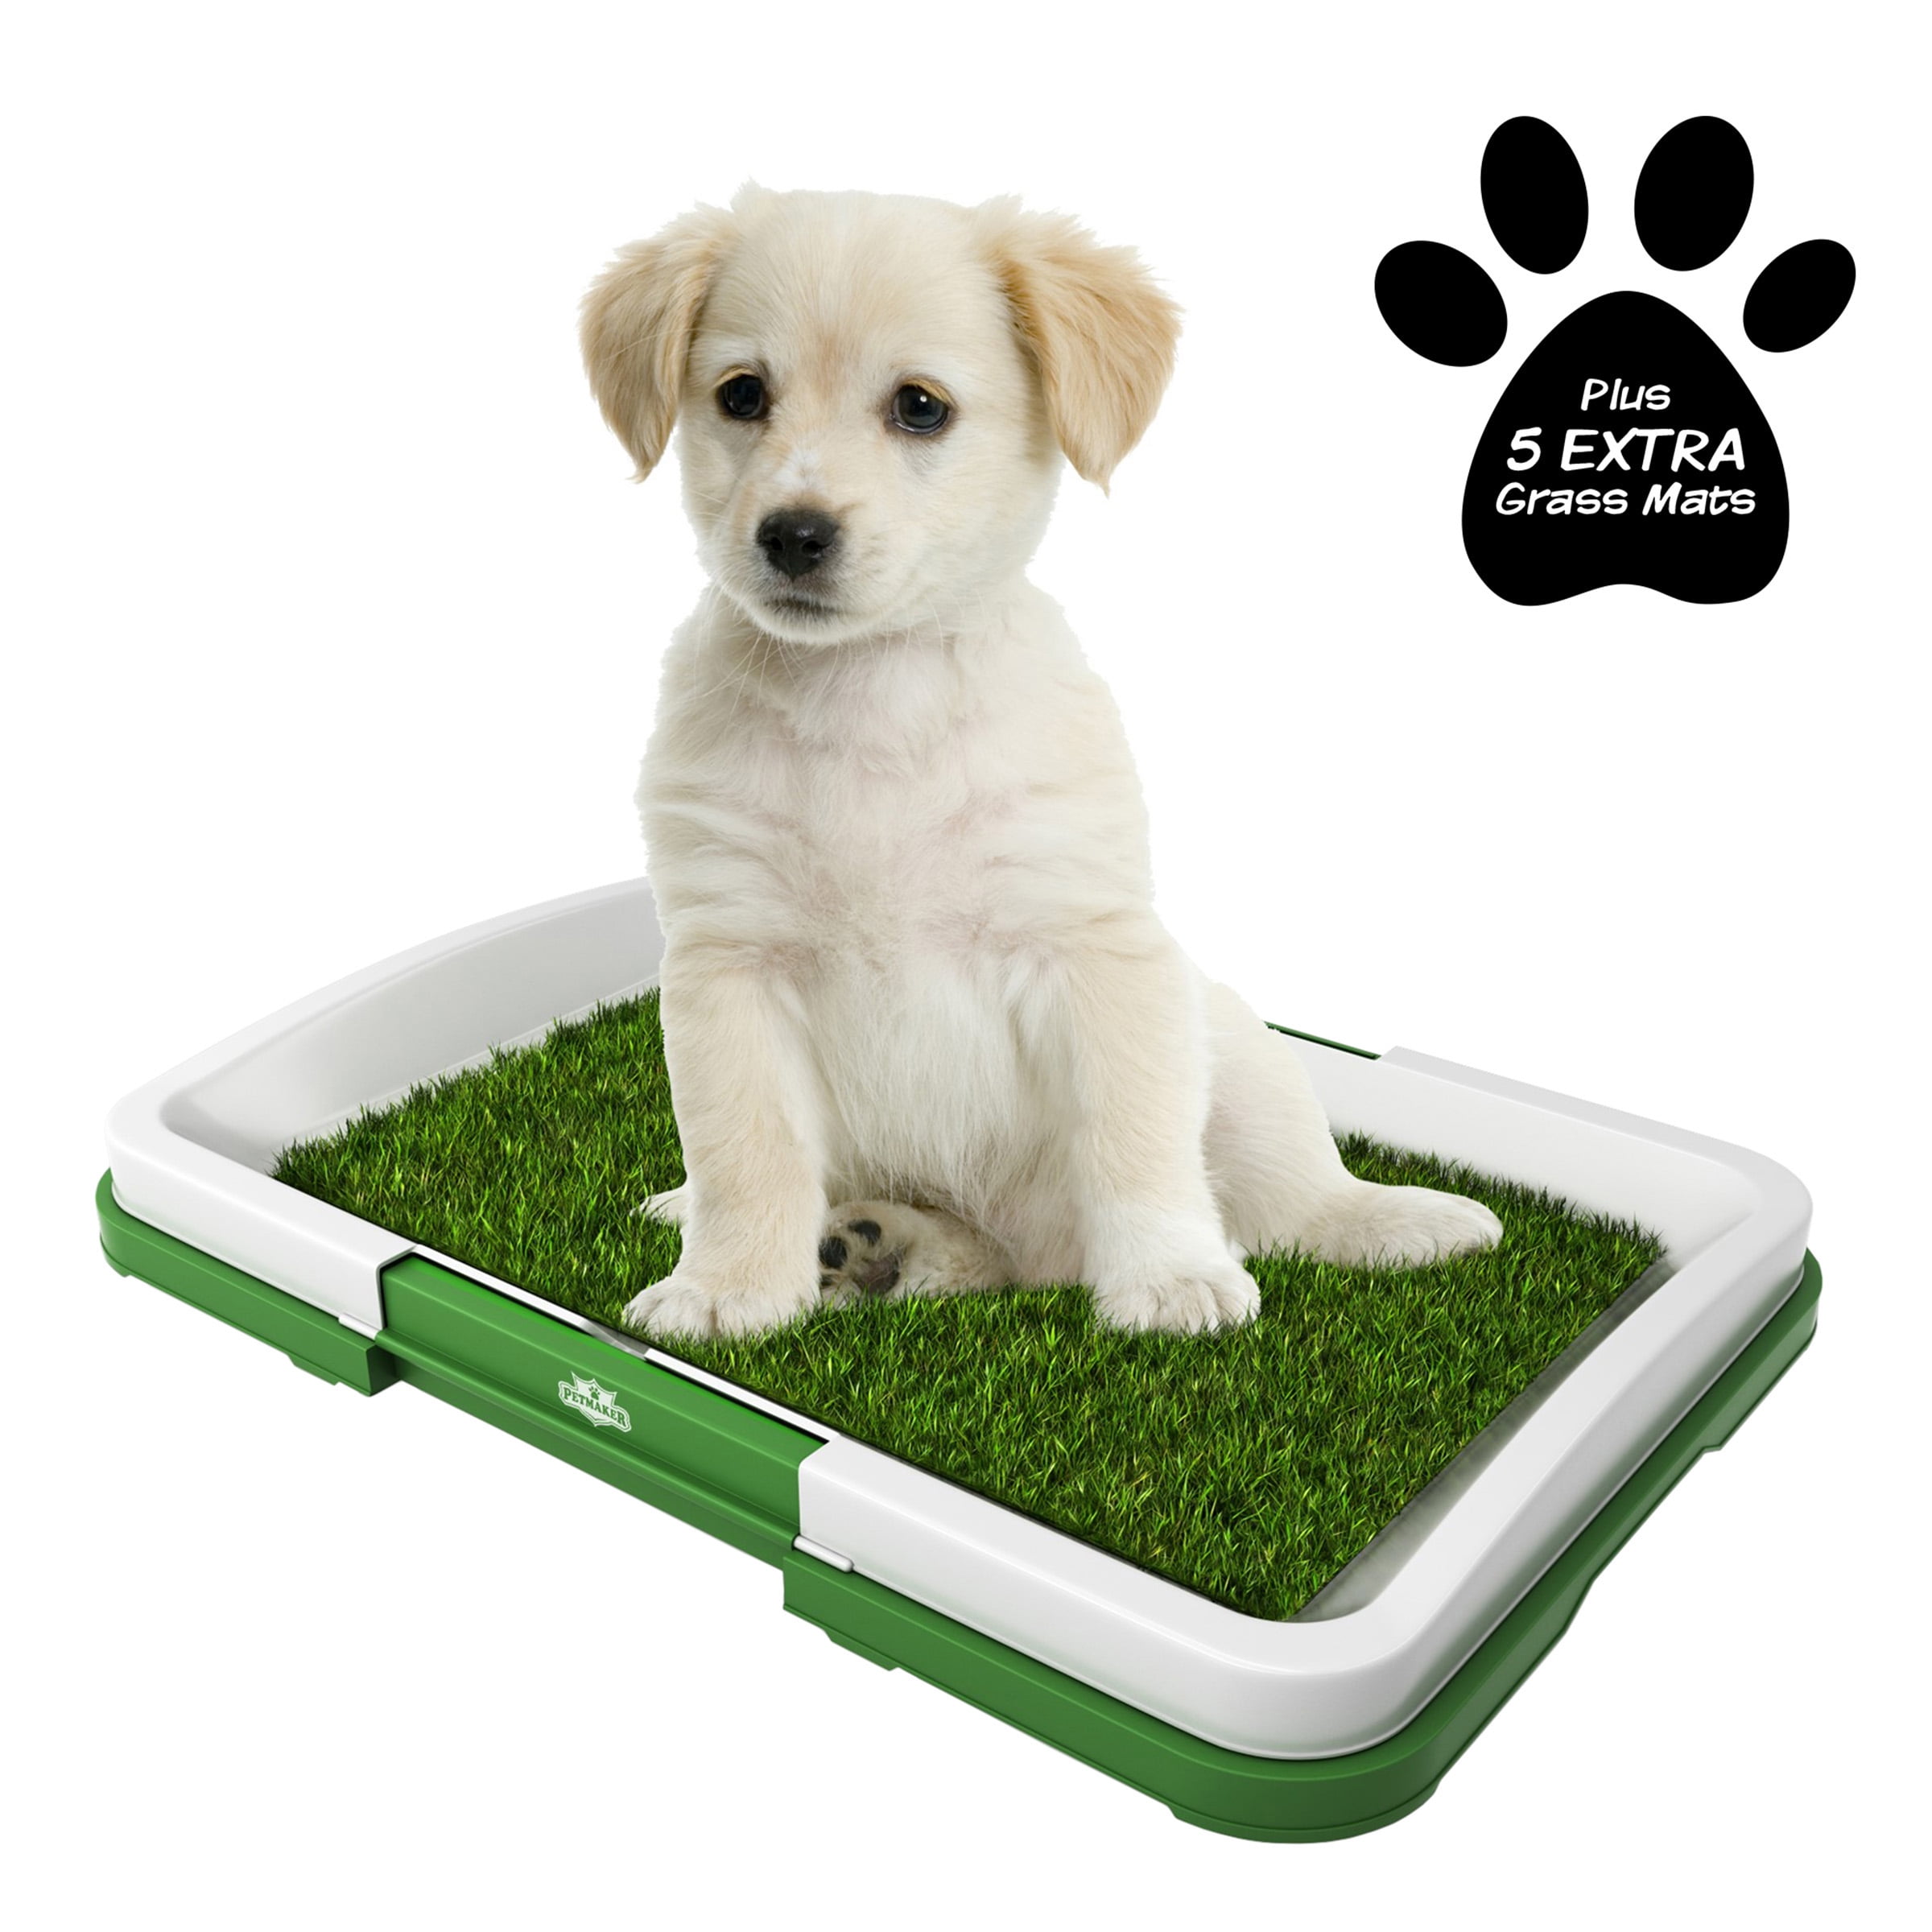 fake grass for puppy toilet training